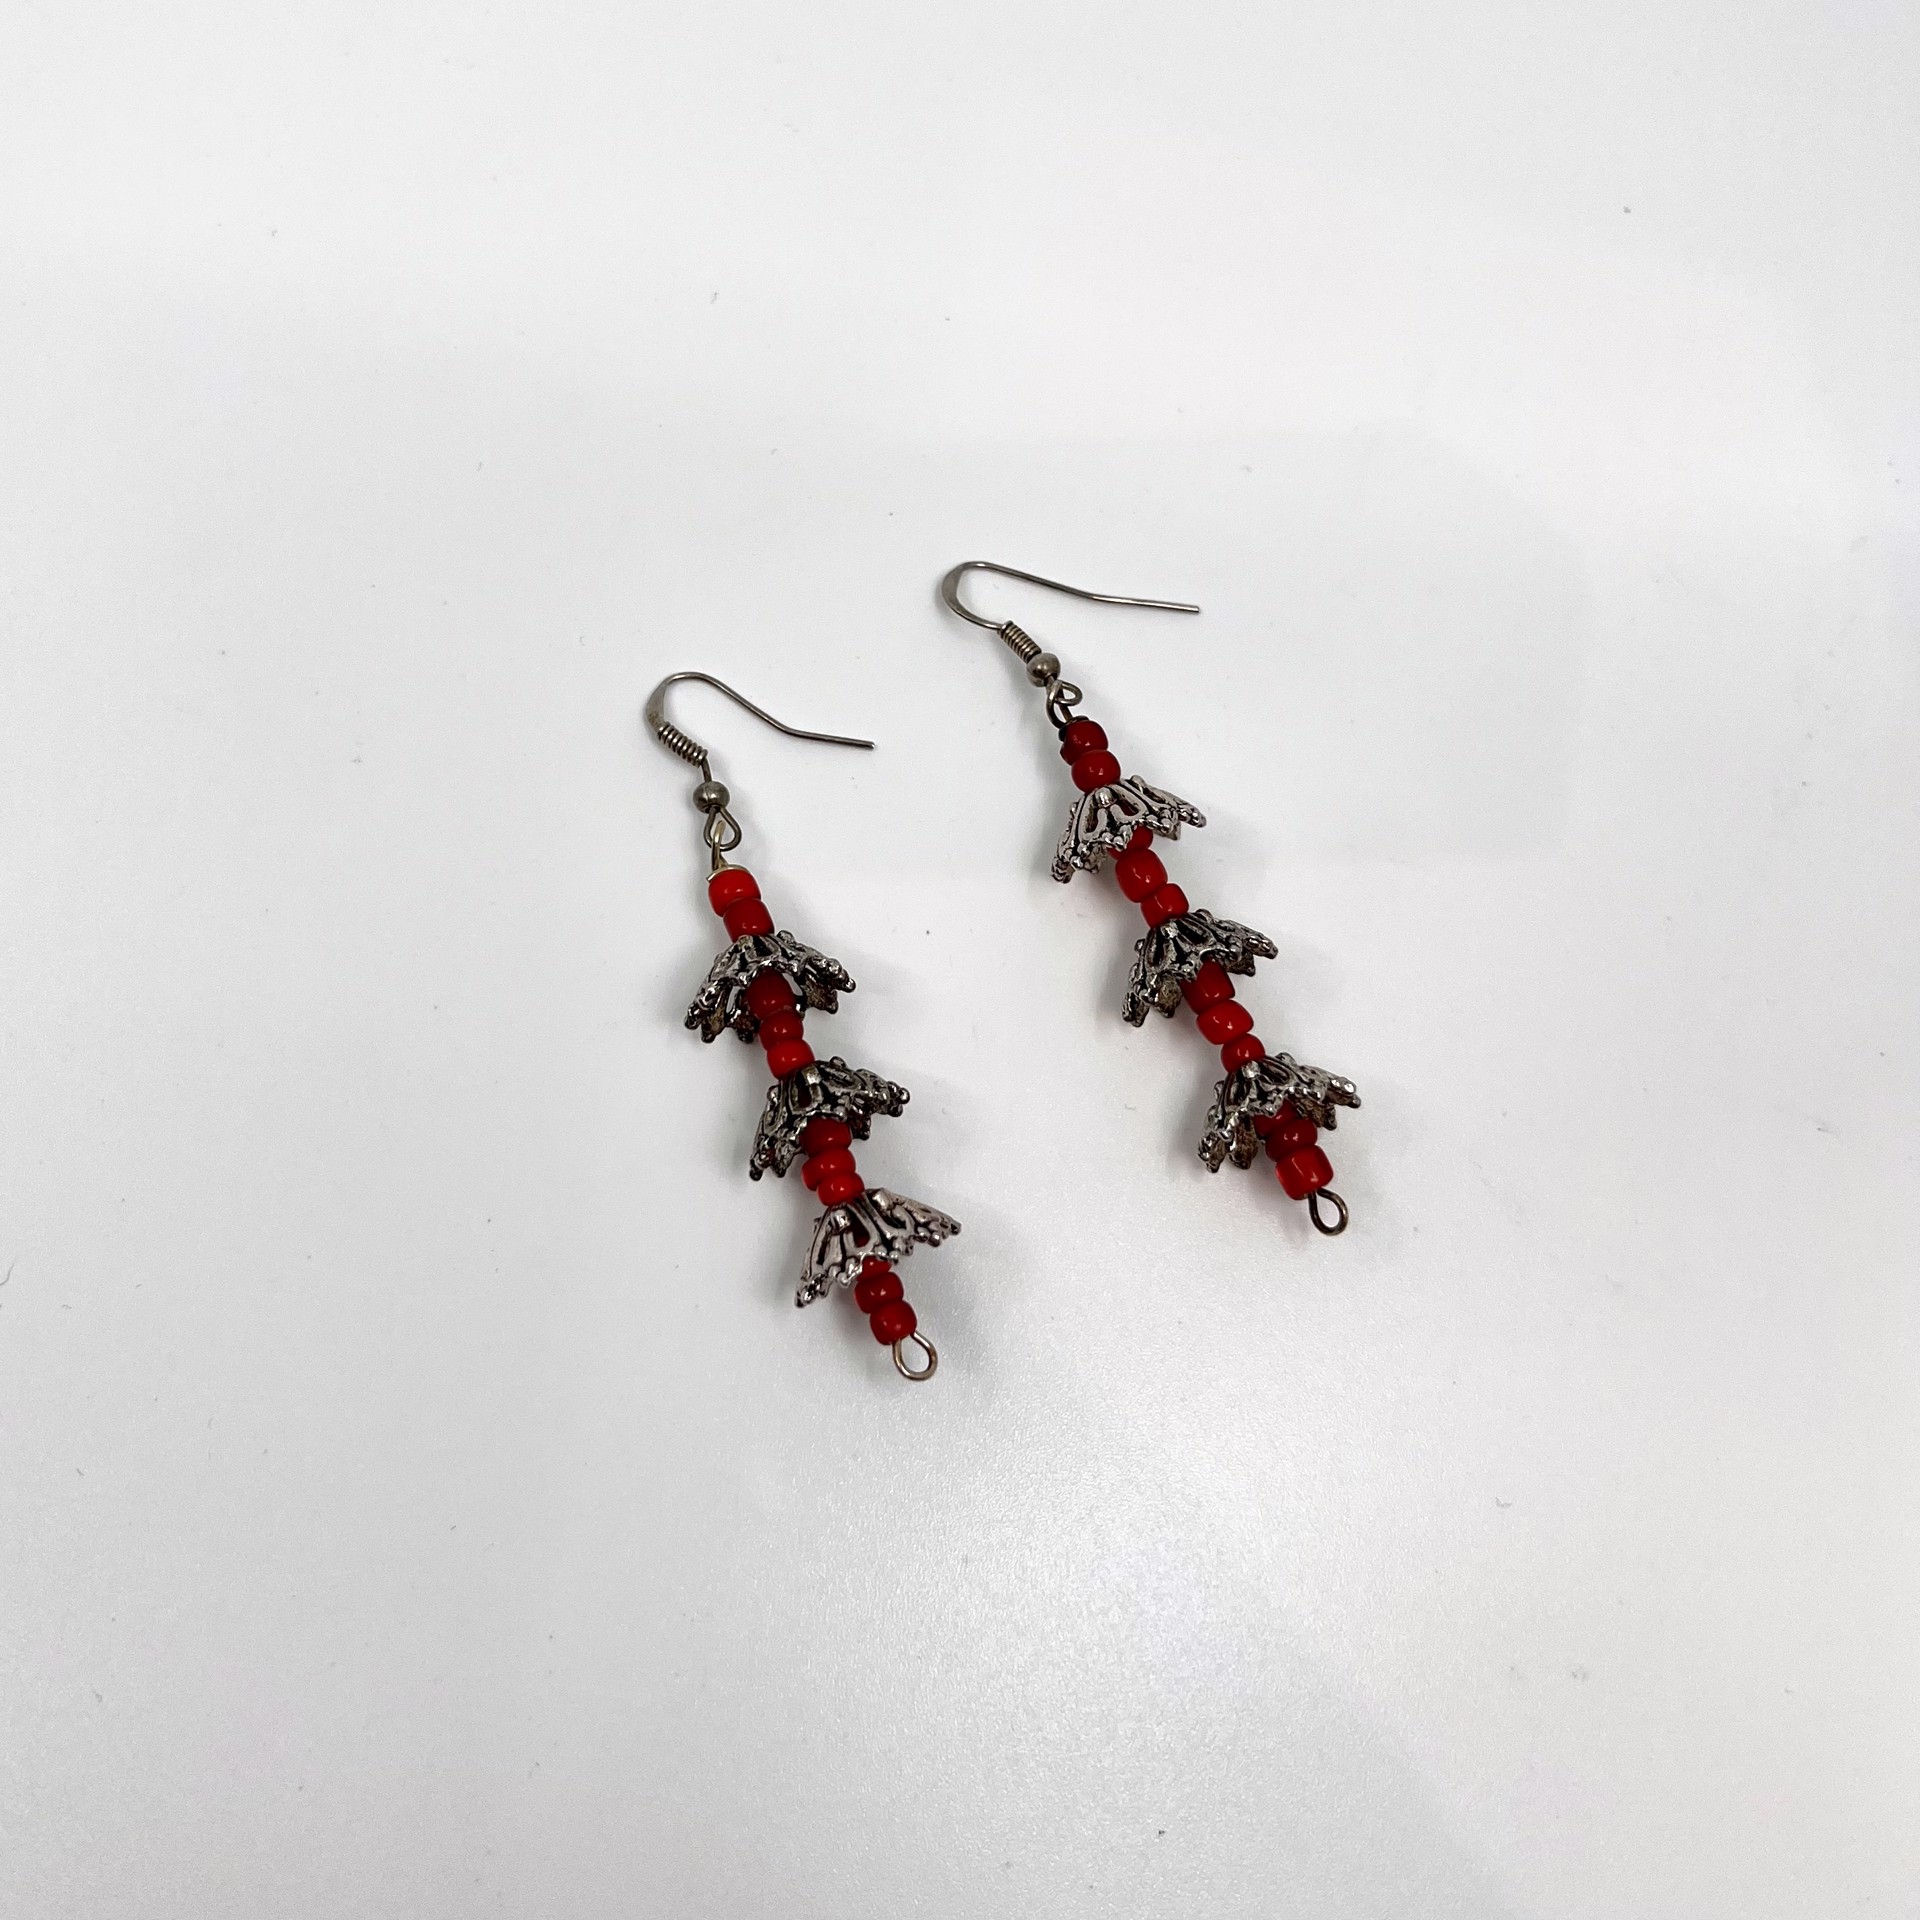 2984 Red Glass & Silver Earrings by Gina Caruso